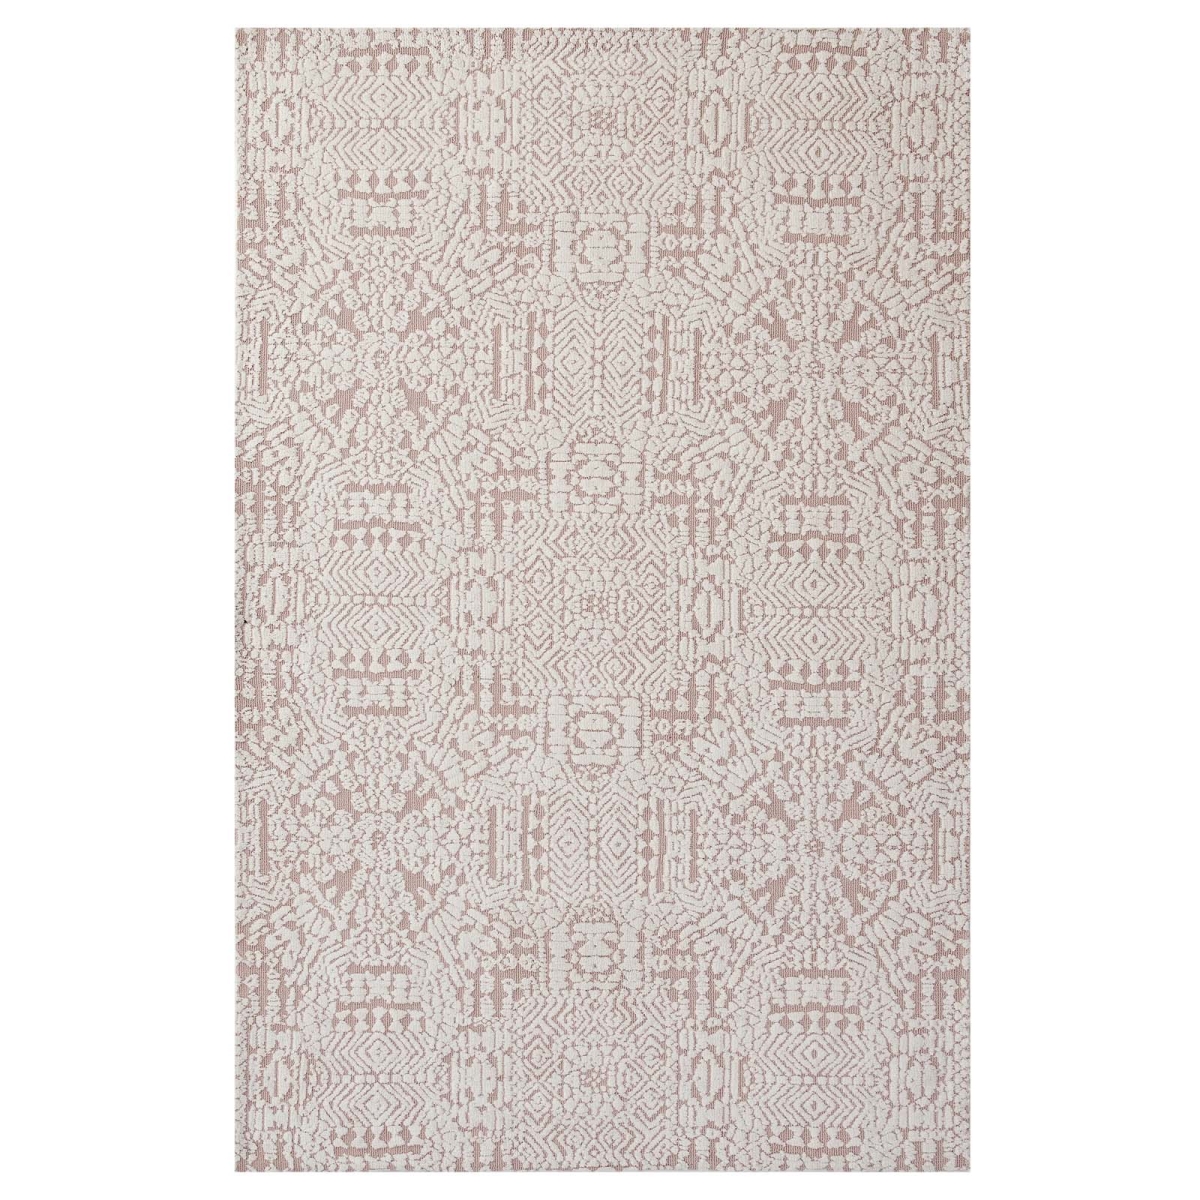 R-1018b-58 5 X 8 Ft. Javiera Contemporary Moroccan Polyester Area Rug - Ivory & Cameo Rose, 0.5 X 60 X 96 In.